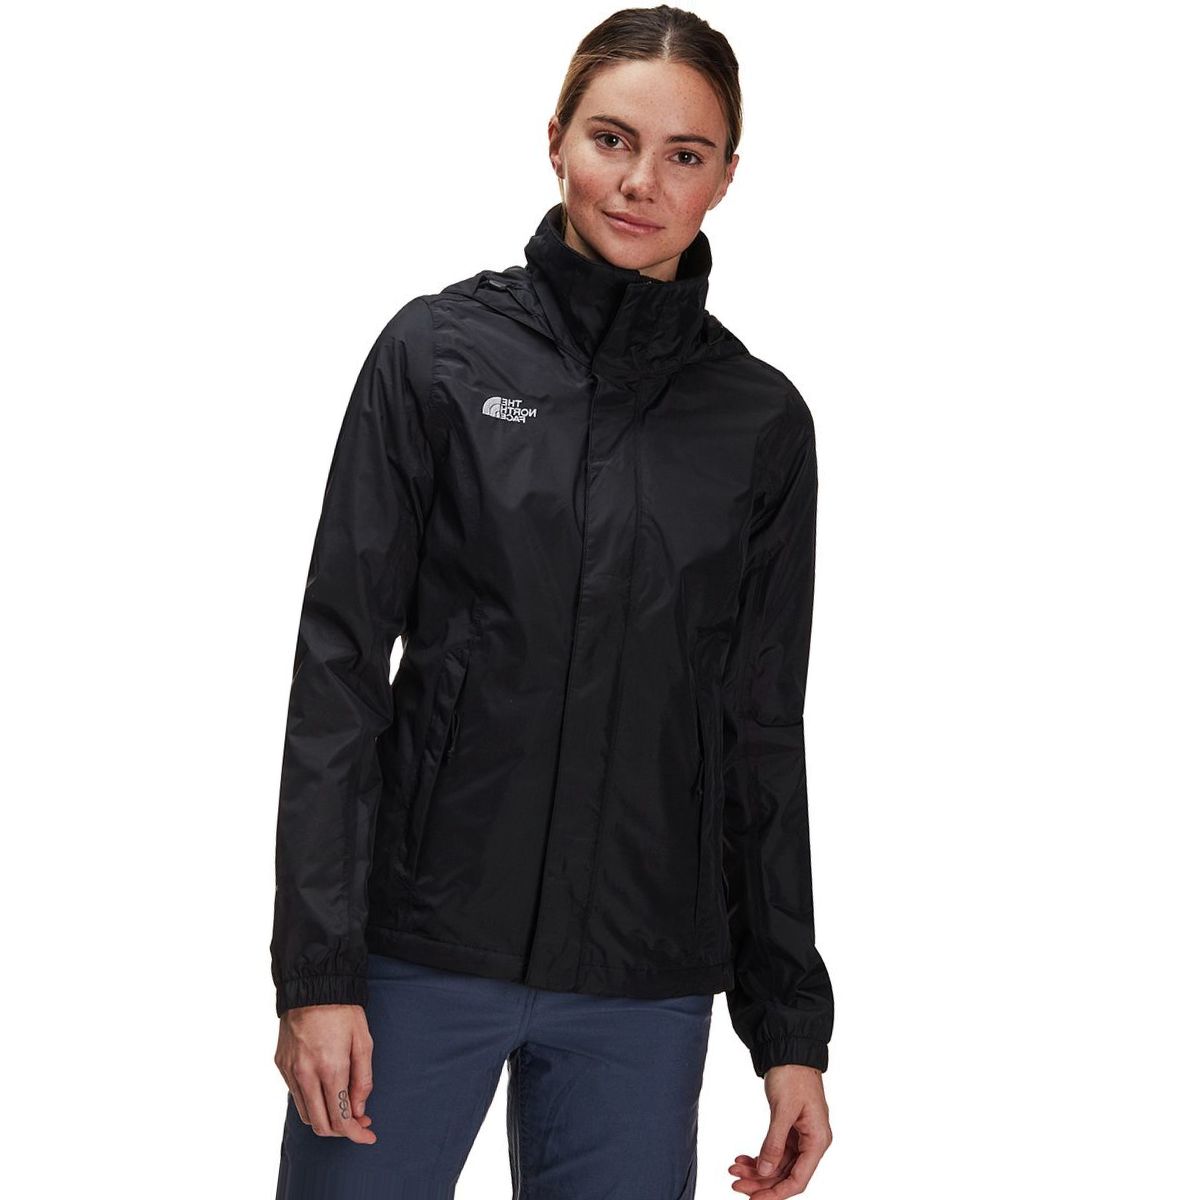 The North Face Resolve 2 Hooded Jacket - Women's